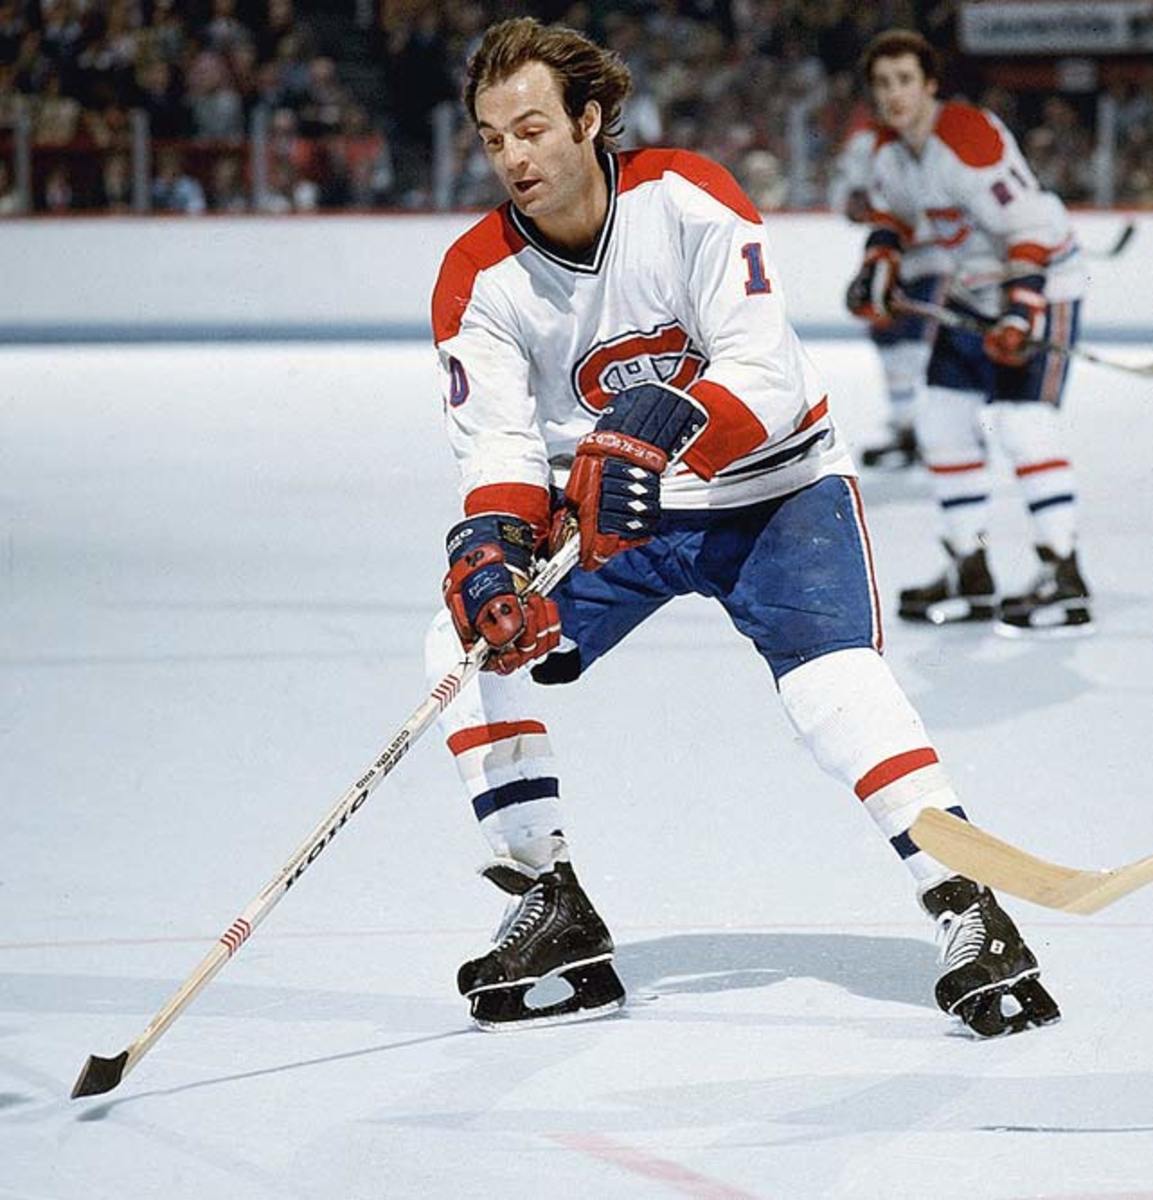 When Guy Lafleur returned to the ice in Montreal  as a New York Ranger